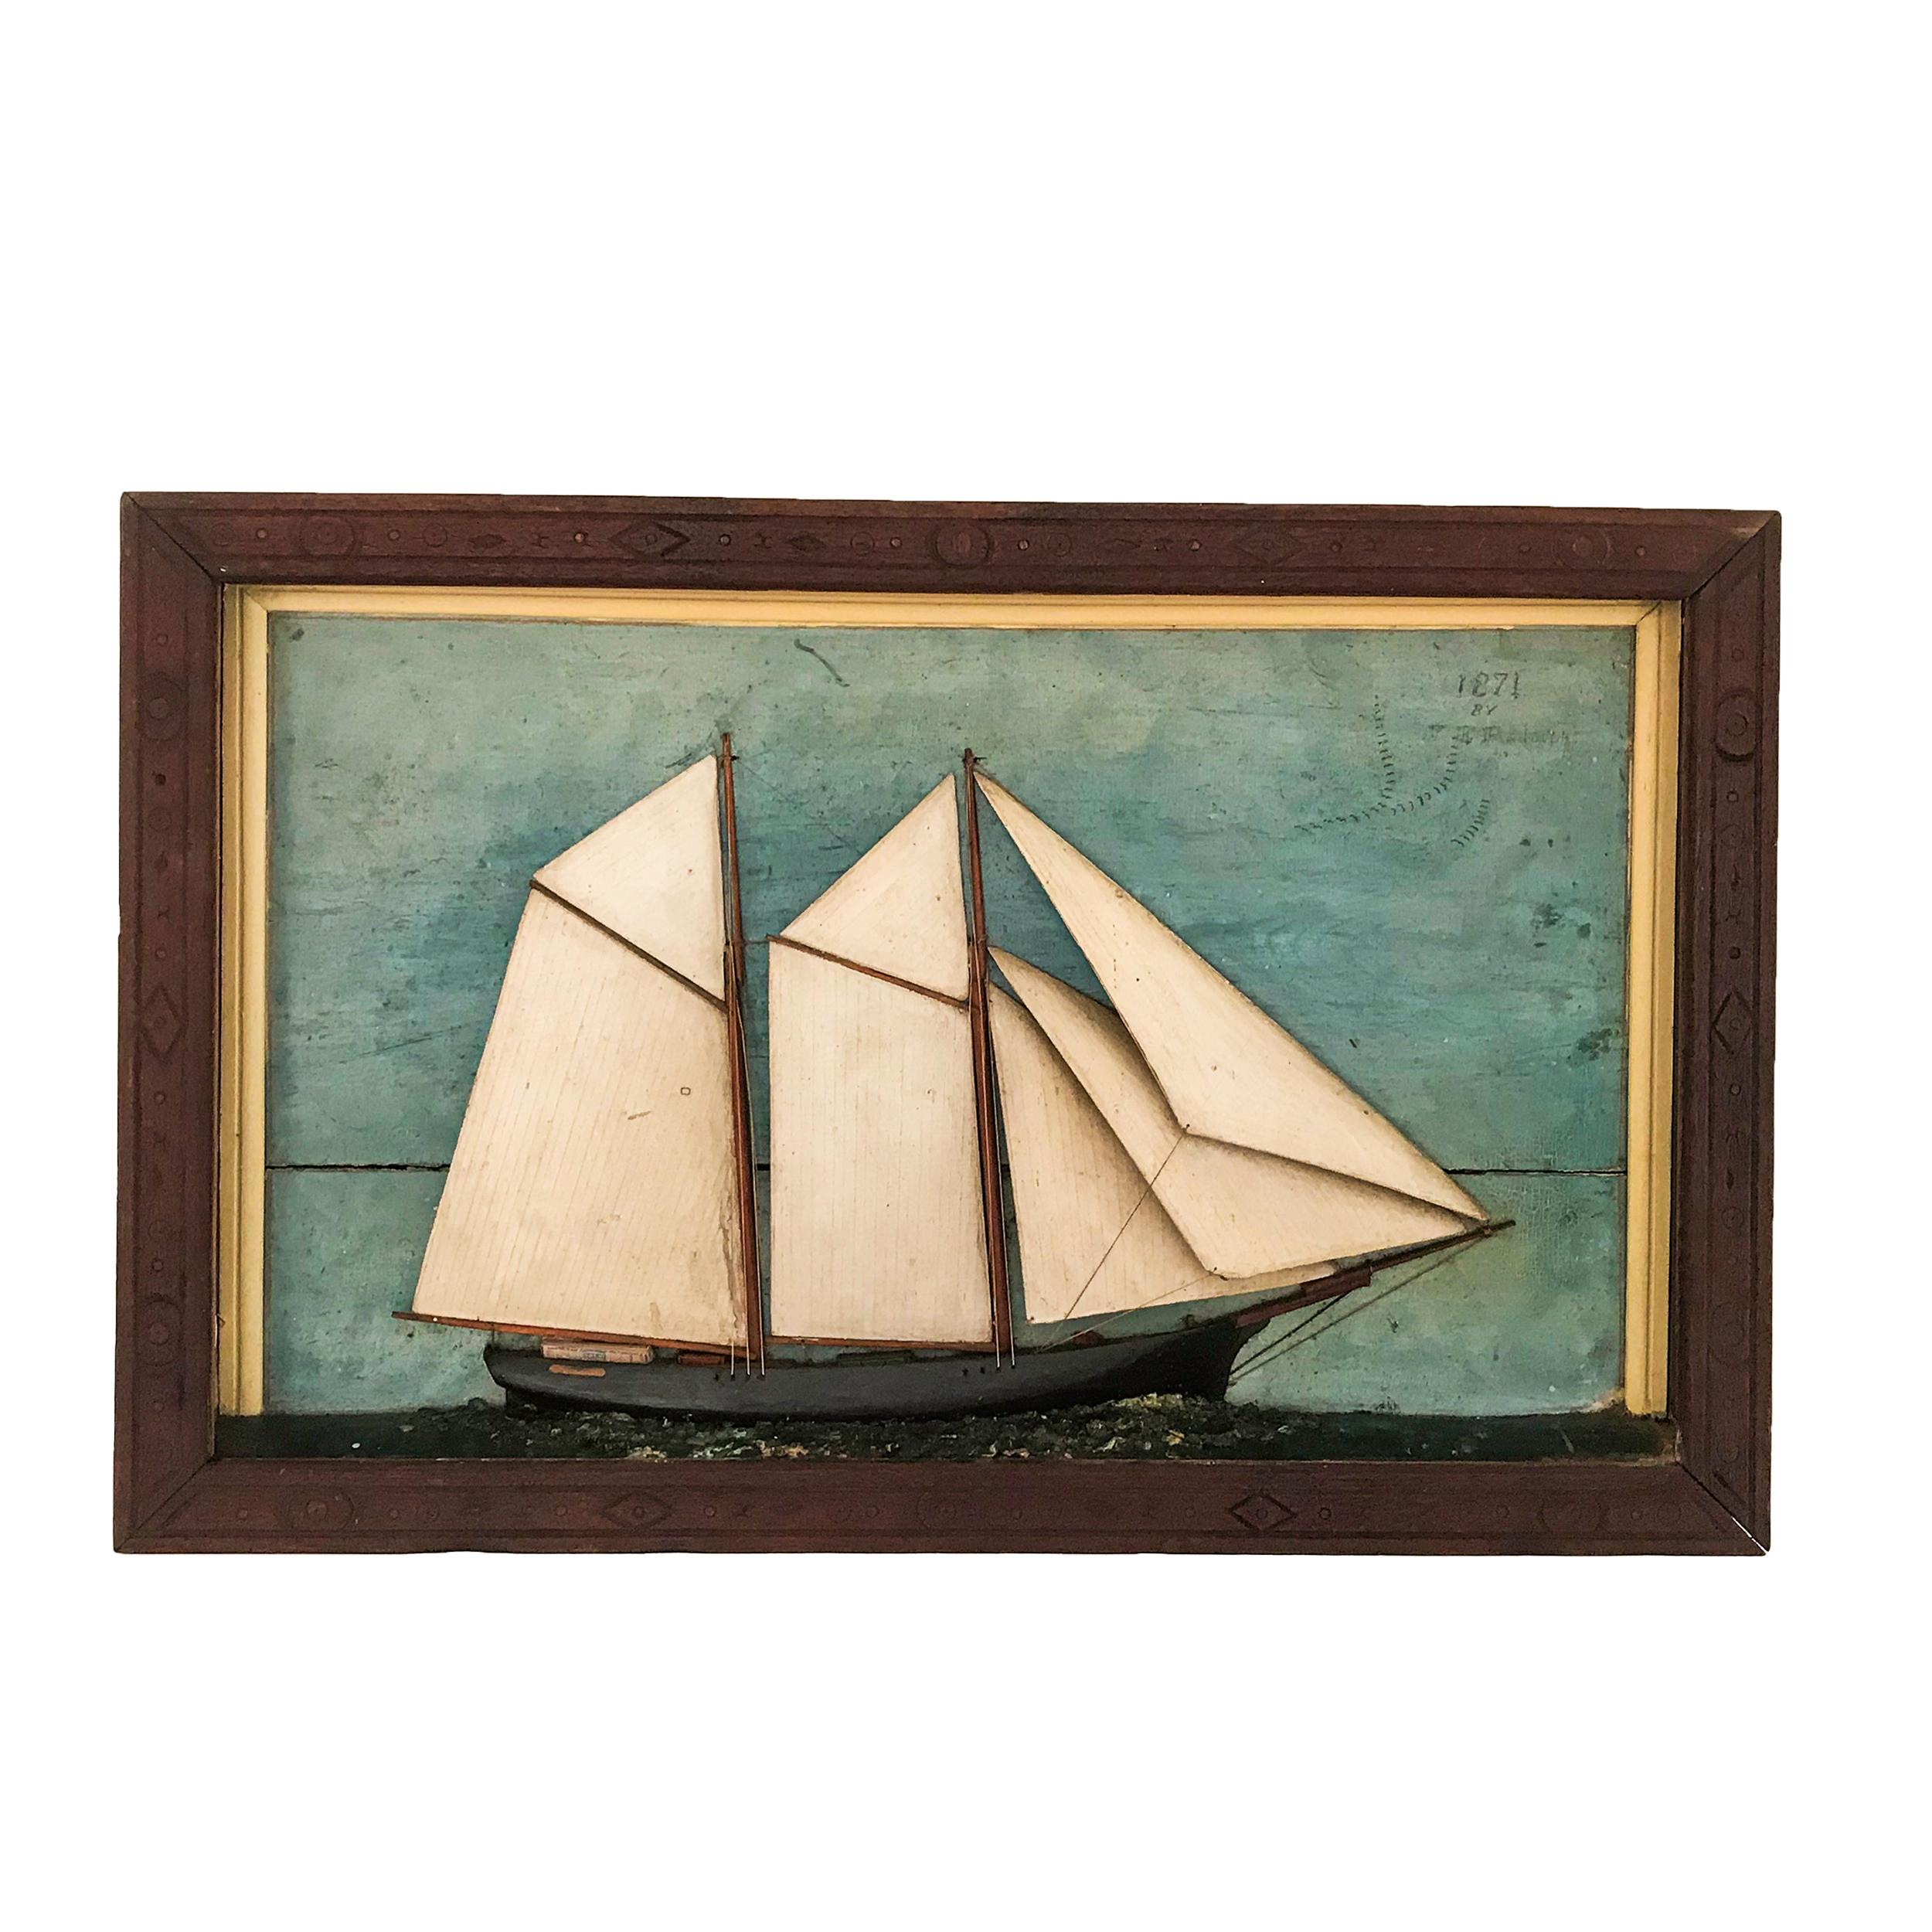 The shadow box depicts a two masted topsail schooner with painted background
Top right of the of the sky is signed and dated “J.E. Rudolph 1871